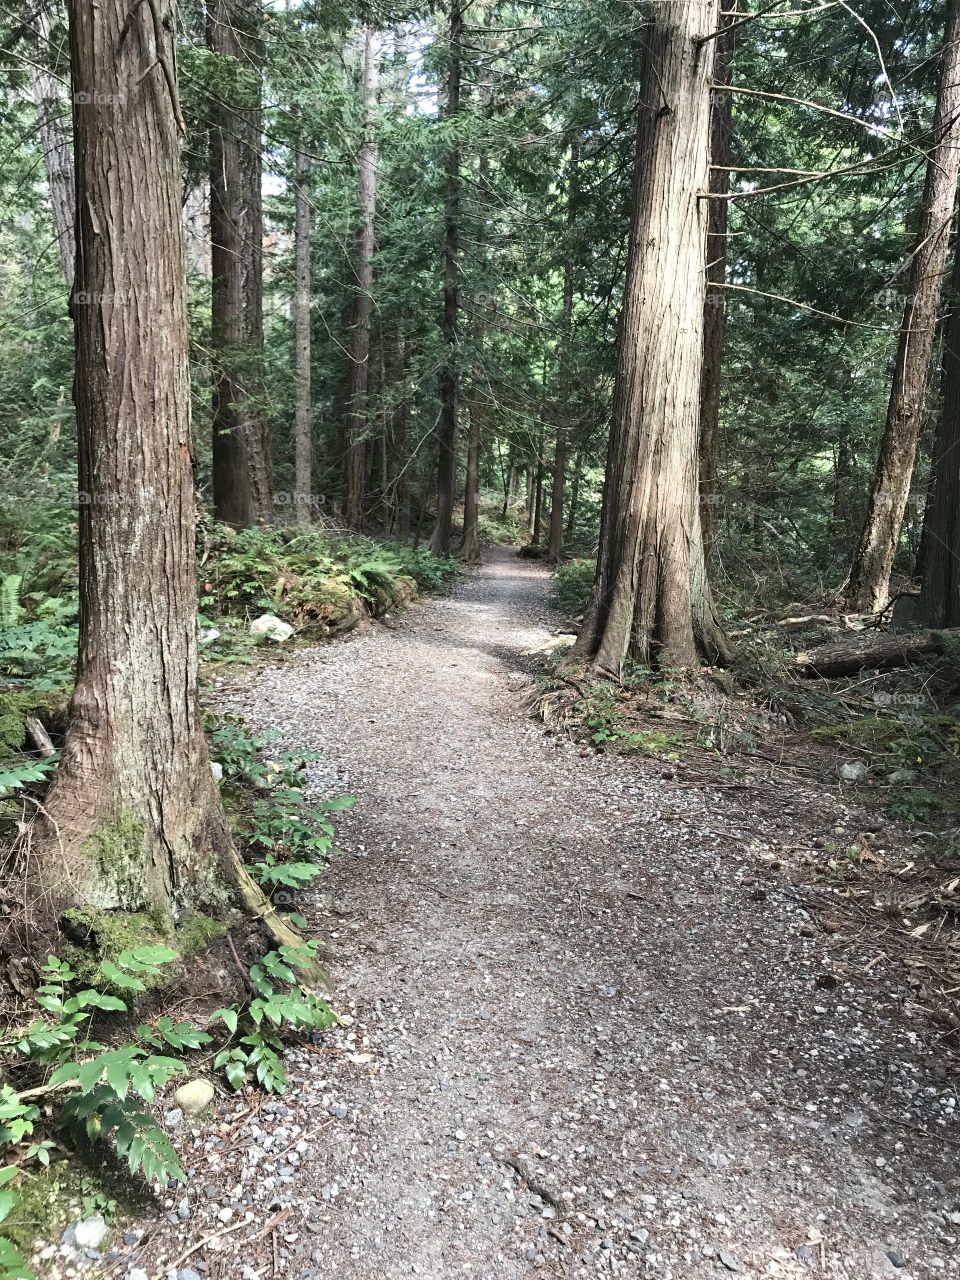 Summer Vacation on the West Coast. Hiking through a beautiful evergreen forest.